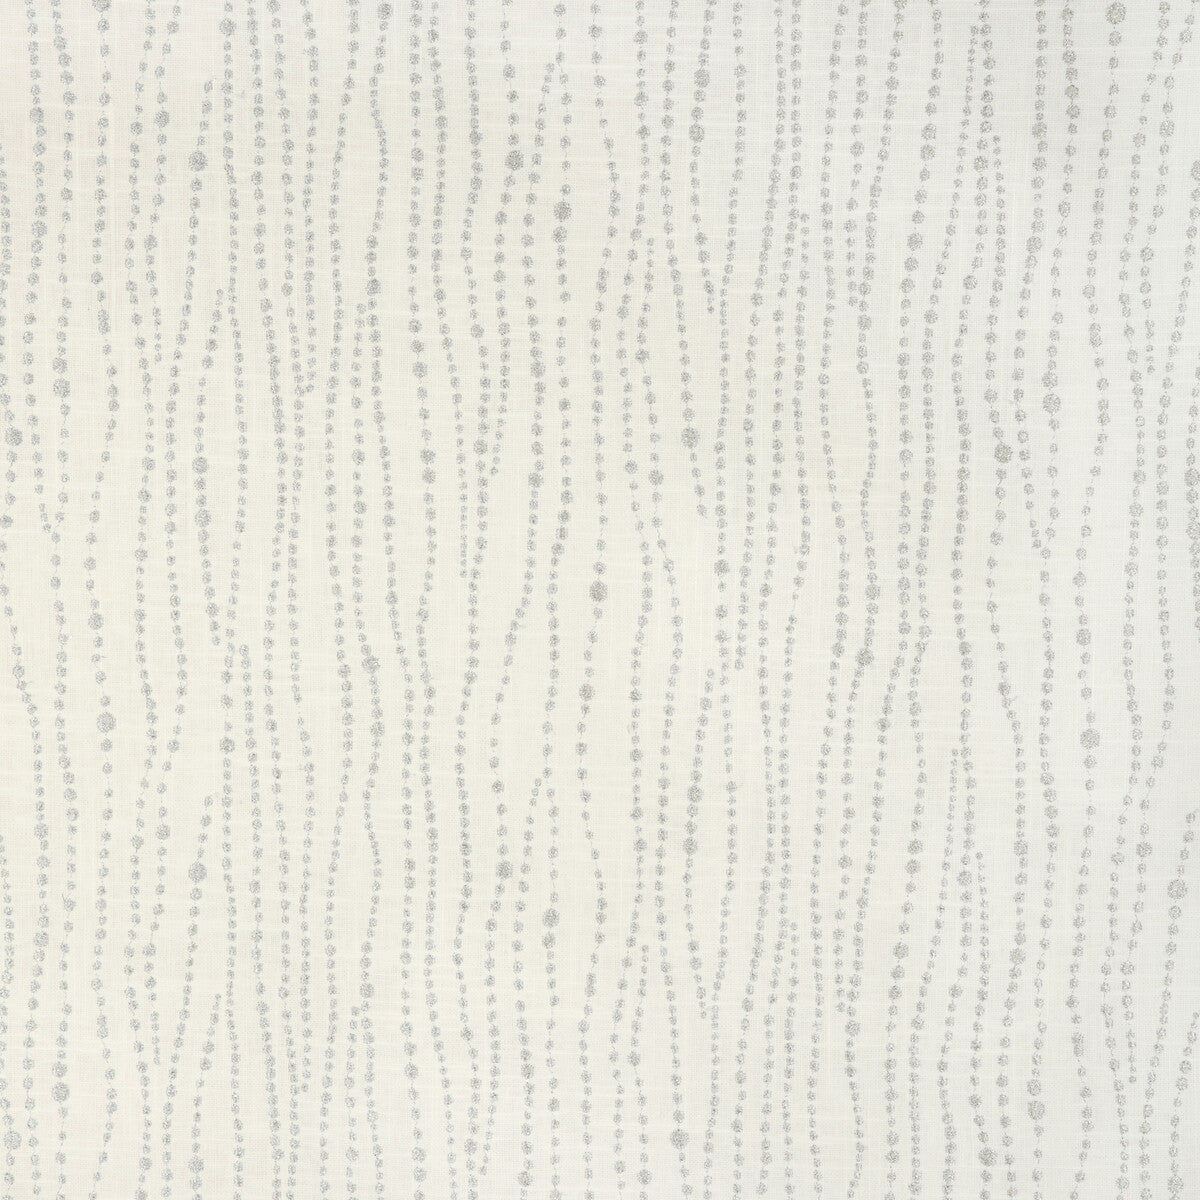 Denali fabric in silver color - pattern 4192.1101.0 - by Kravet Design in the Candice Olson collection